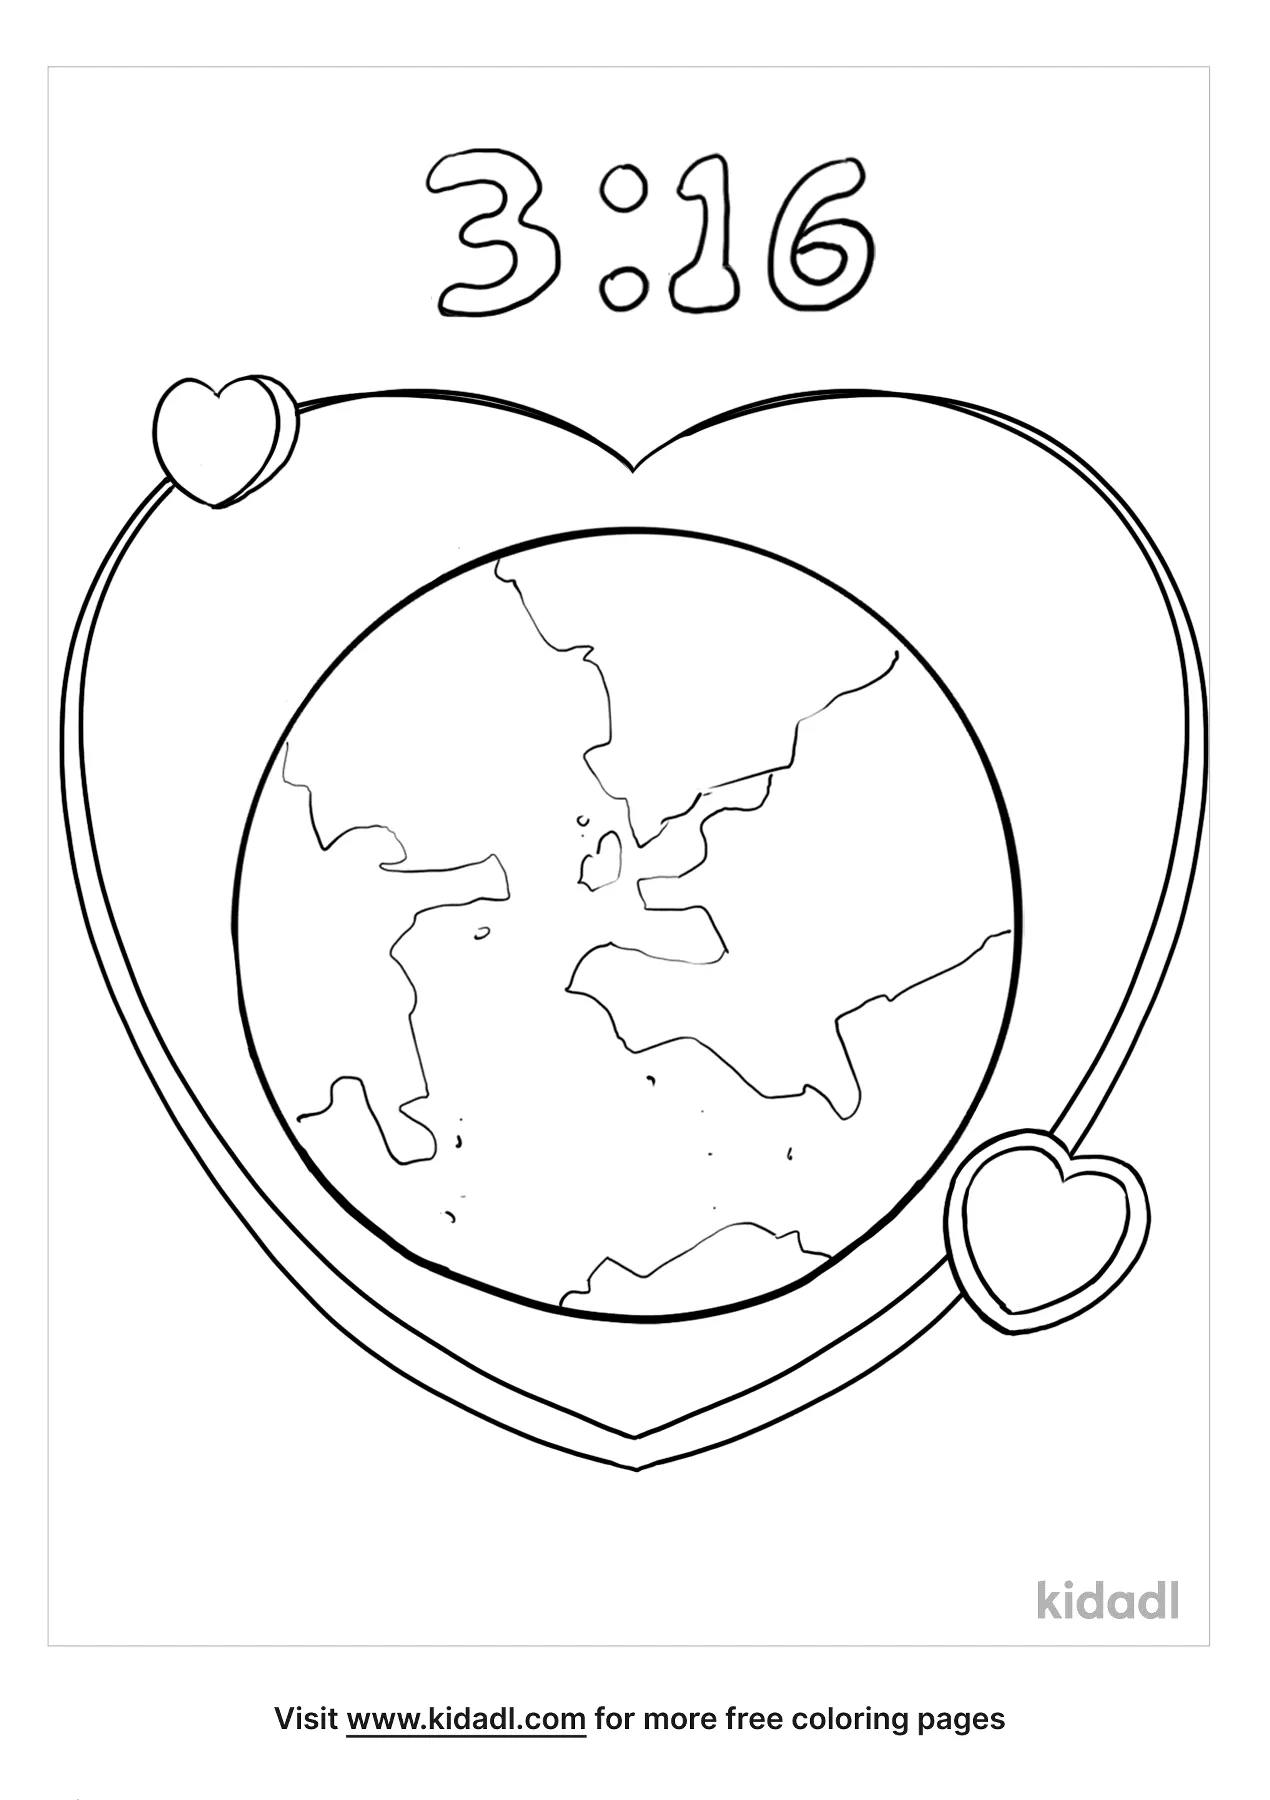 John 3:16 Coloring Pages